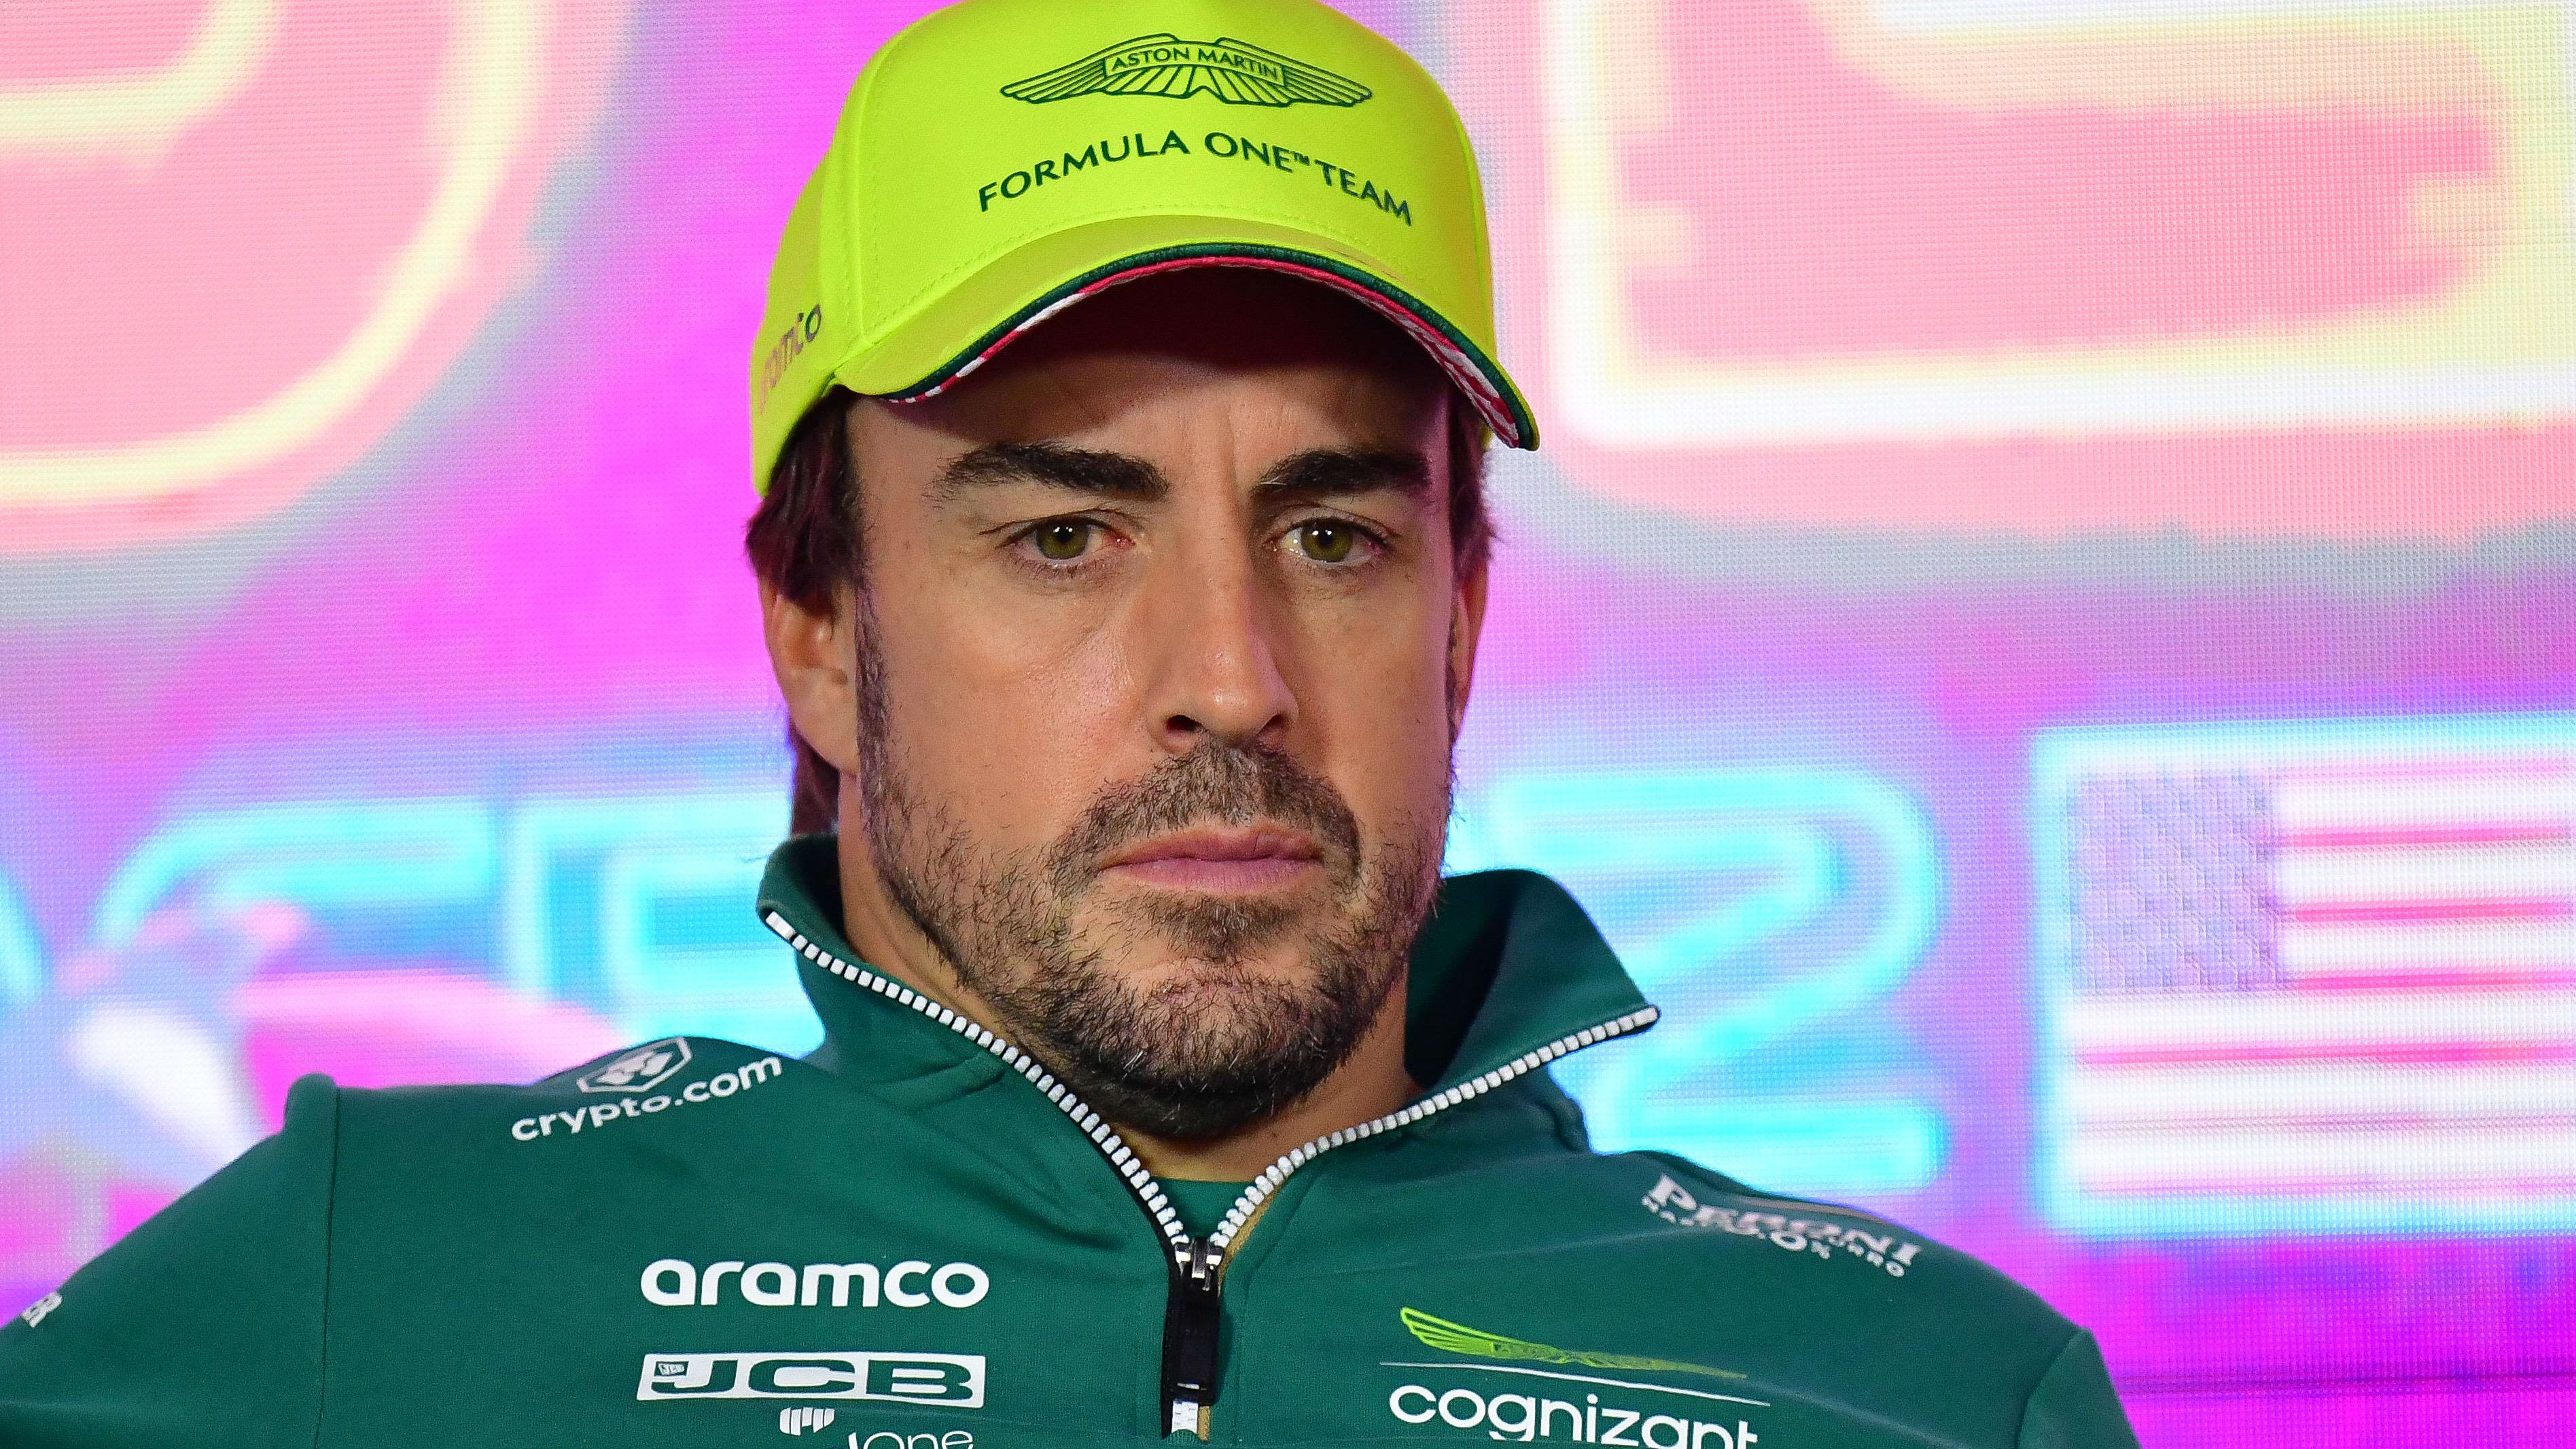 Fernando Alonso Causes Mayhem As He Responds to Taylor Swift Song